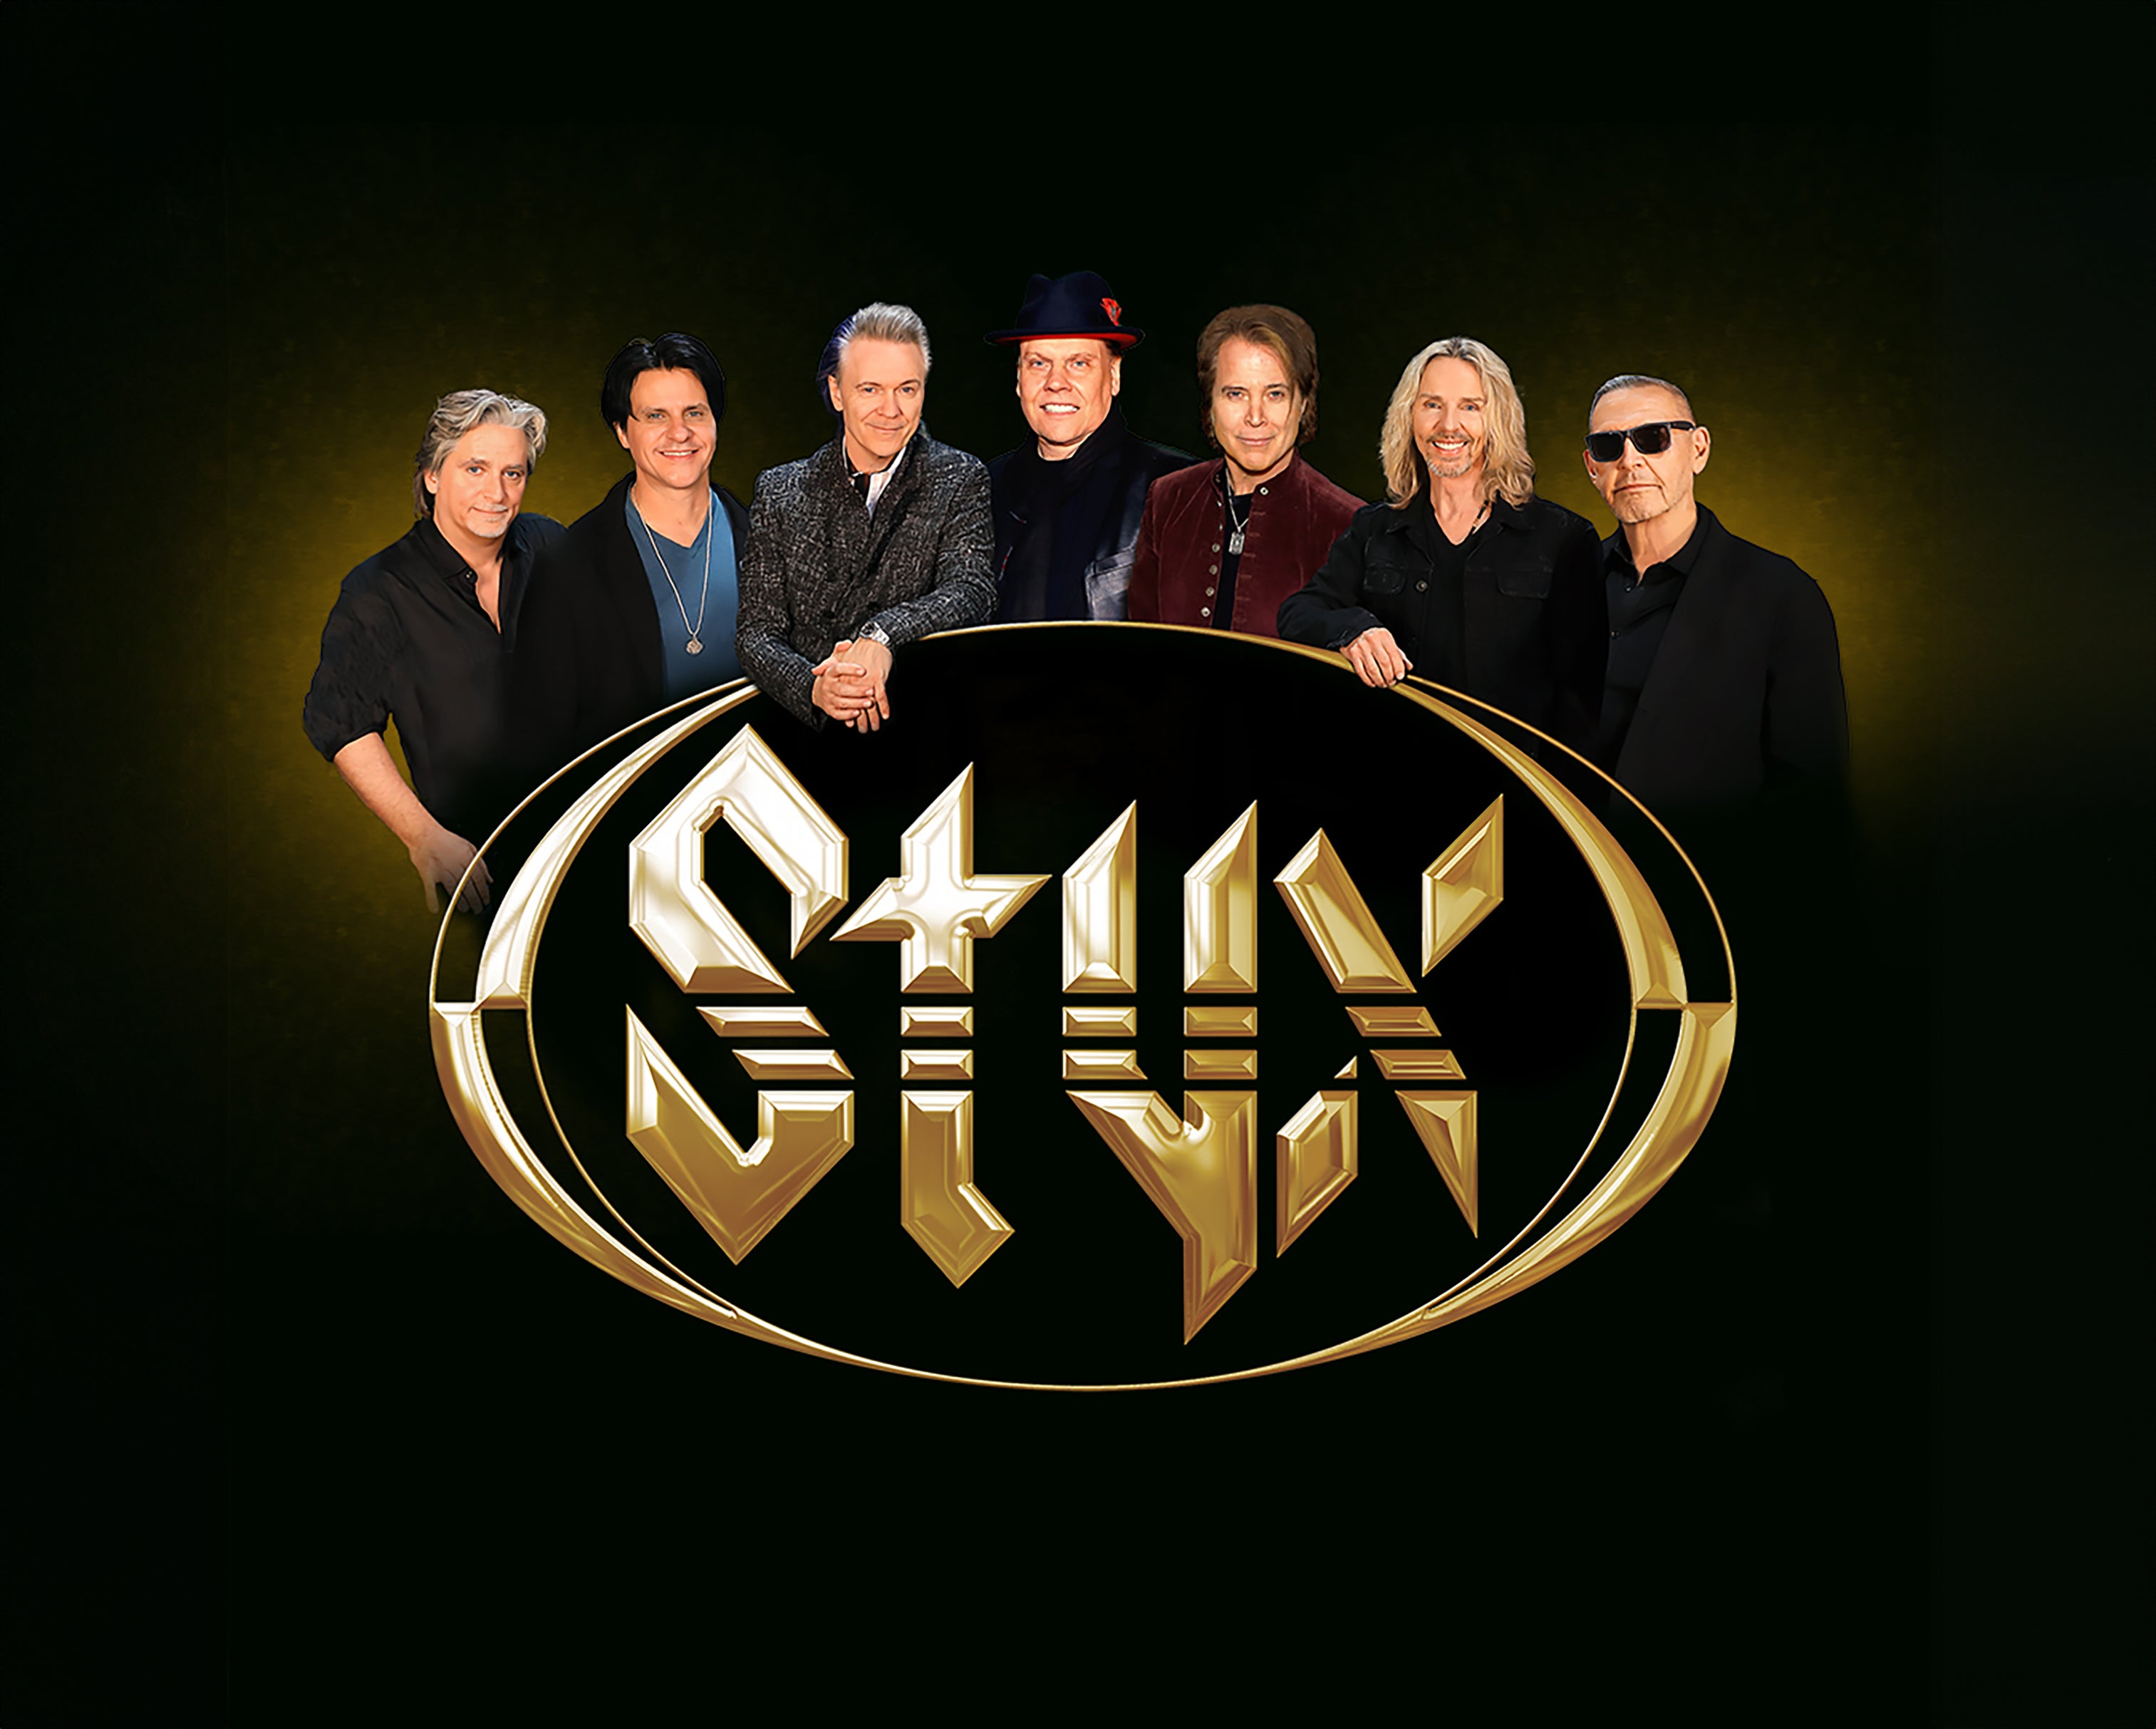 Styx presale code for concert tickets in Independence, MO (Cable Dahmer Arena)